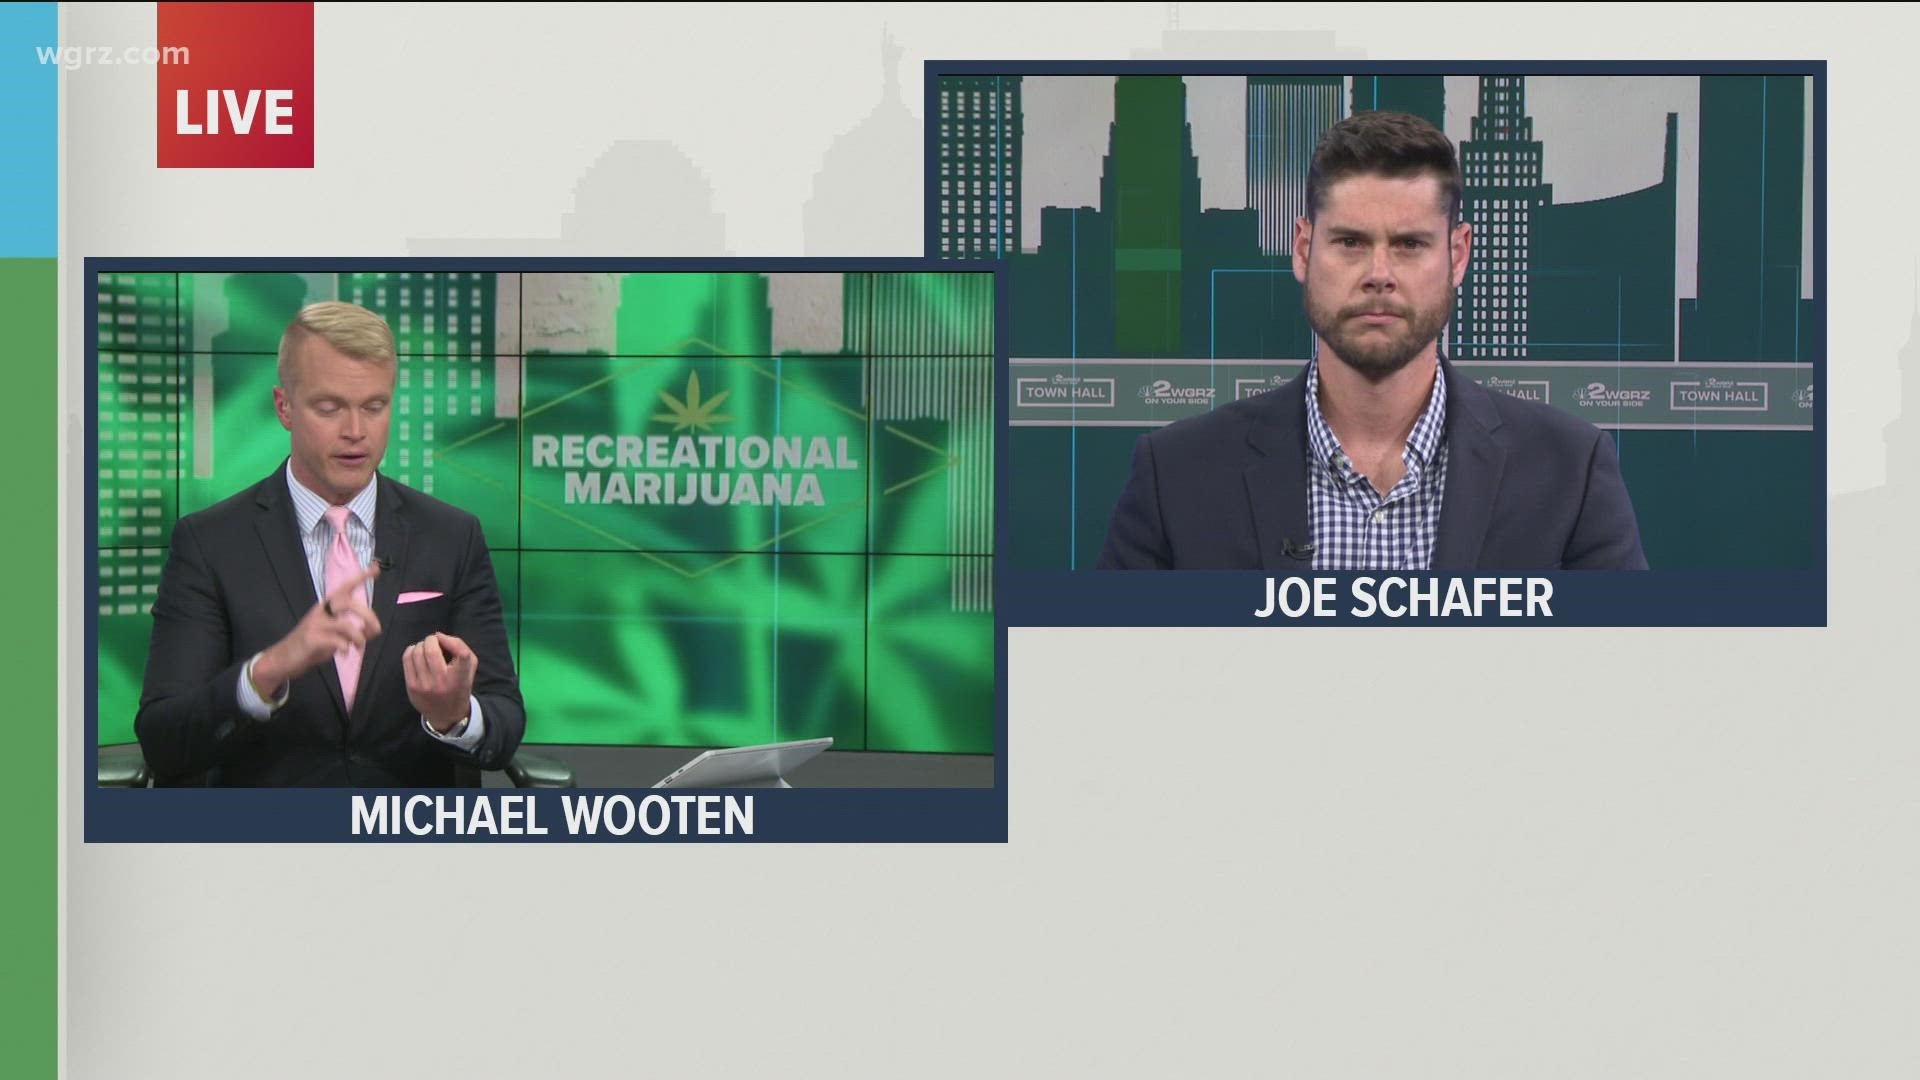 Joe Schafer, an attorney at Lippes Mathias, joined our Town Hall to discuss cannabis dispensaries and their impact in Western New York.